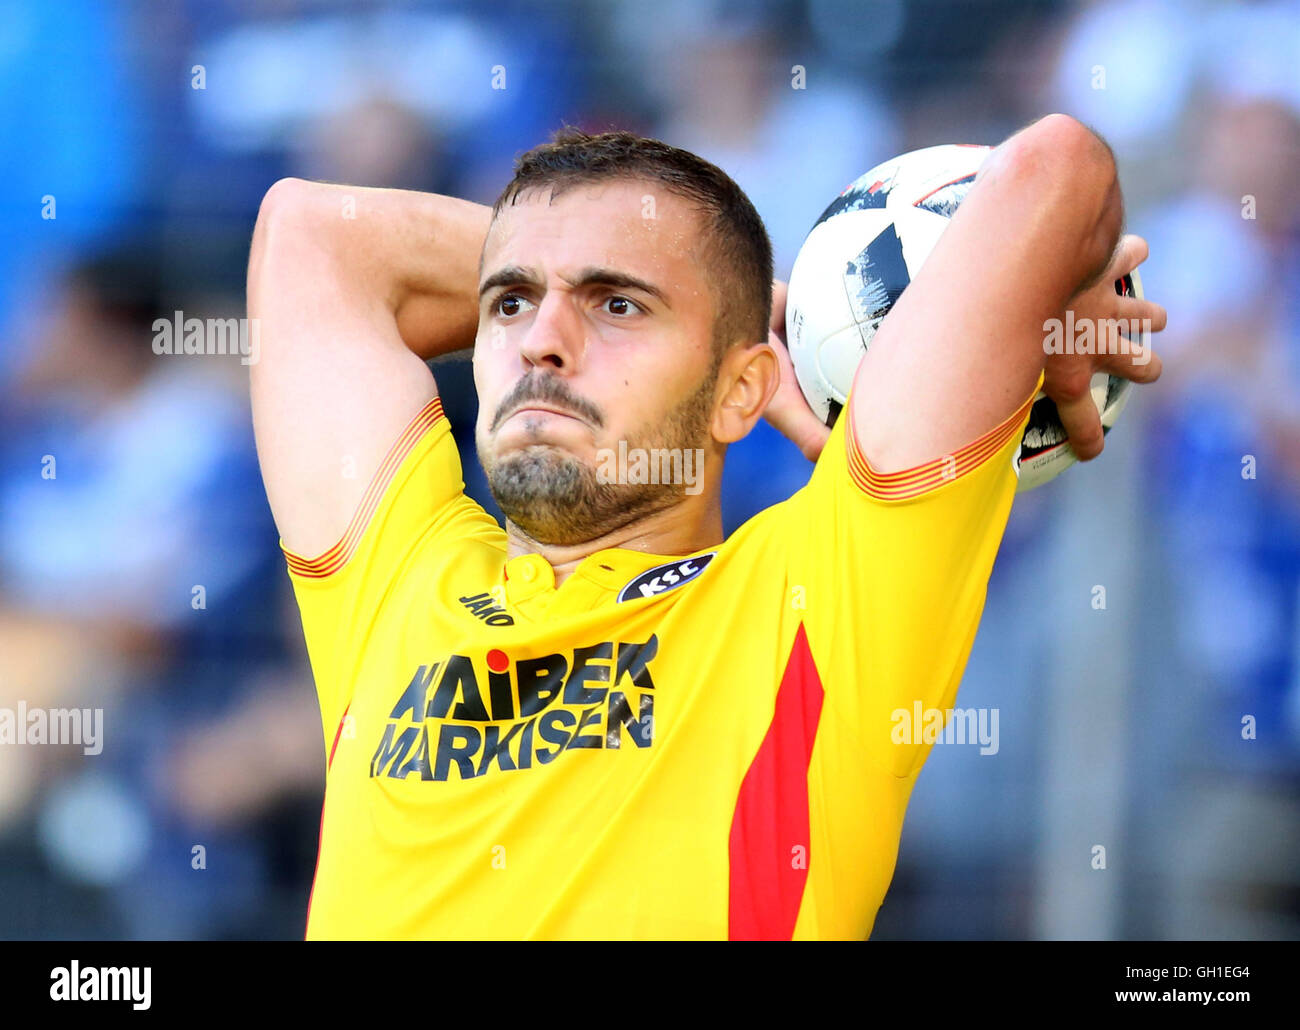 Bielefeld, Germany. 7th Aug, 2016. Karlsruhe's Ylli Sallahi in action during the 2nd Bundesliga Soccer match between Arminia Bielefeld and Karlsruher SC at Schueco Arena in Bielefeld, Germany, 7 August 2016. PHOTO: OLIVER KRATO/dpa/Alamy Live News Stock Photo